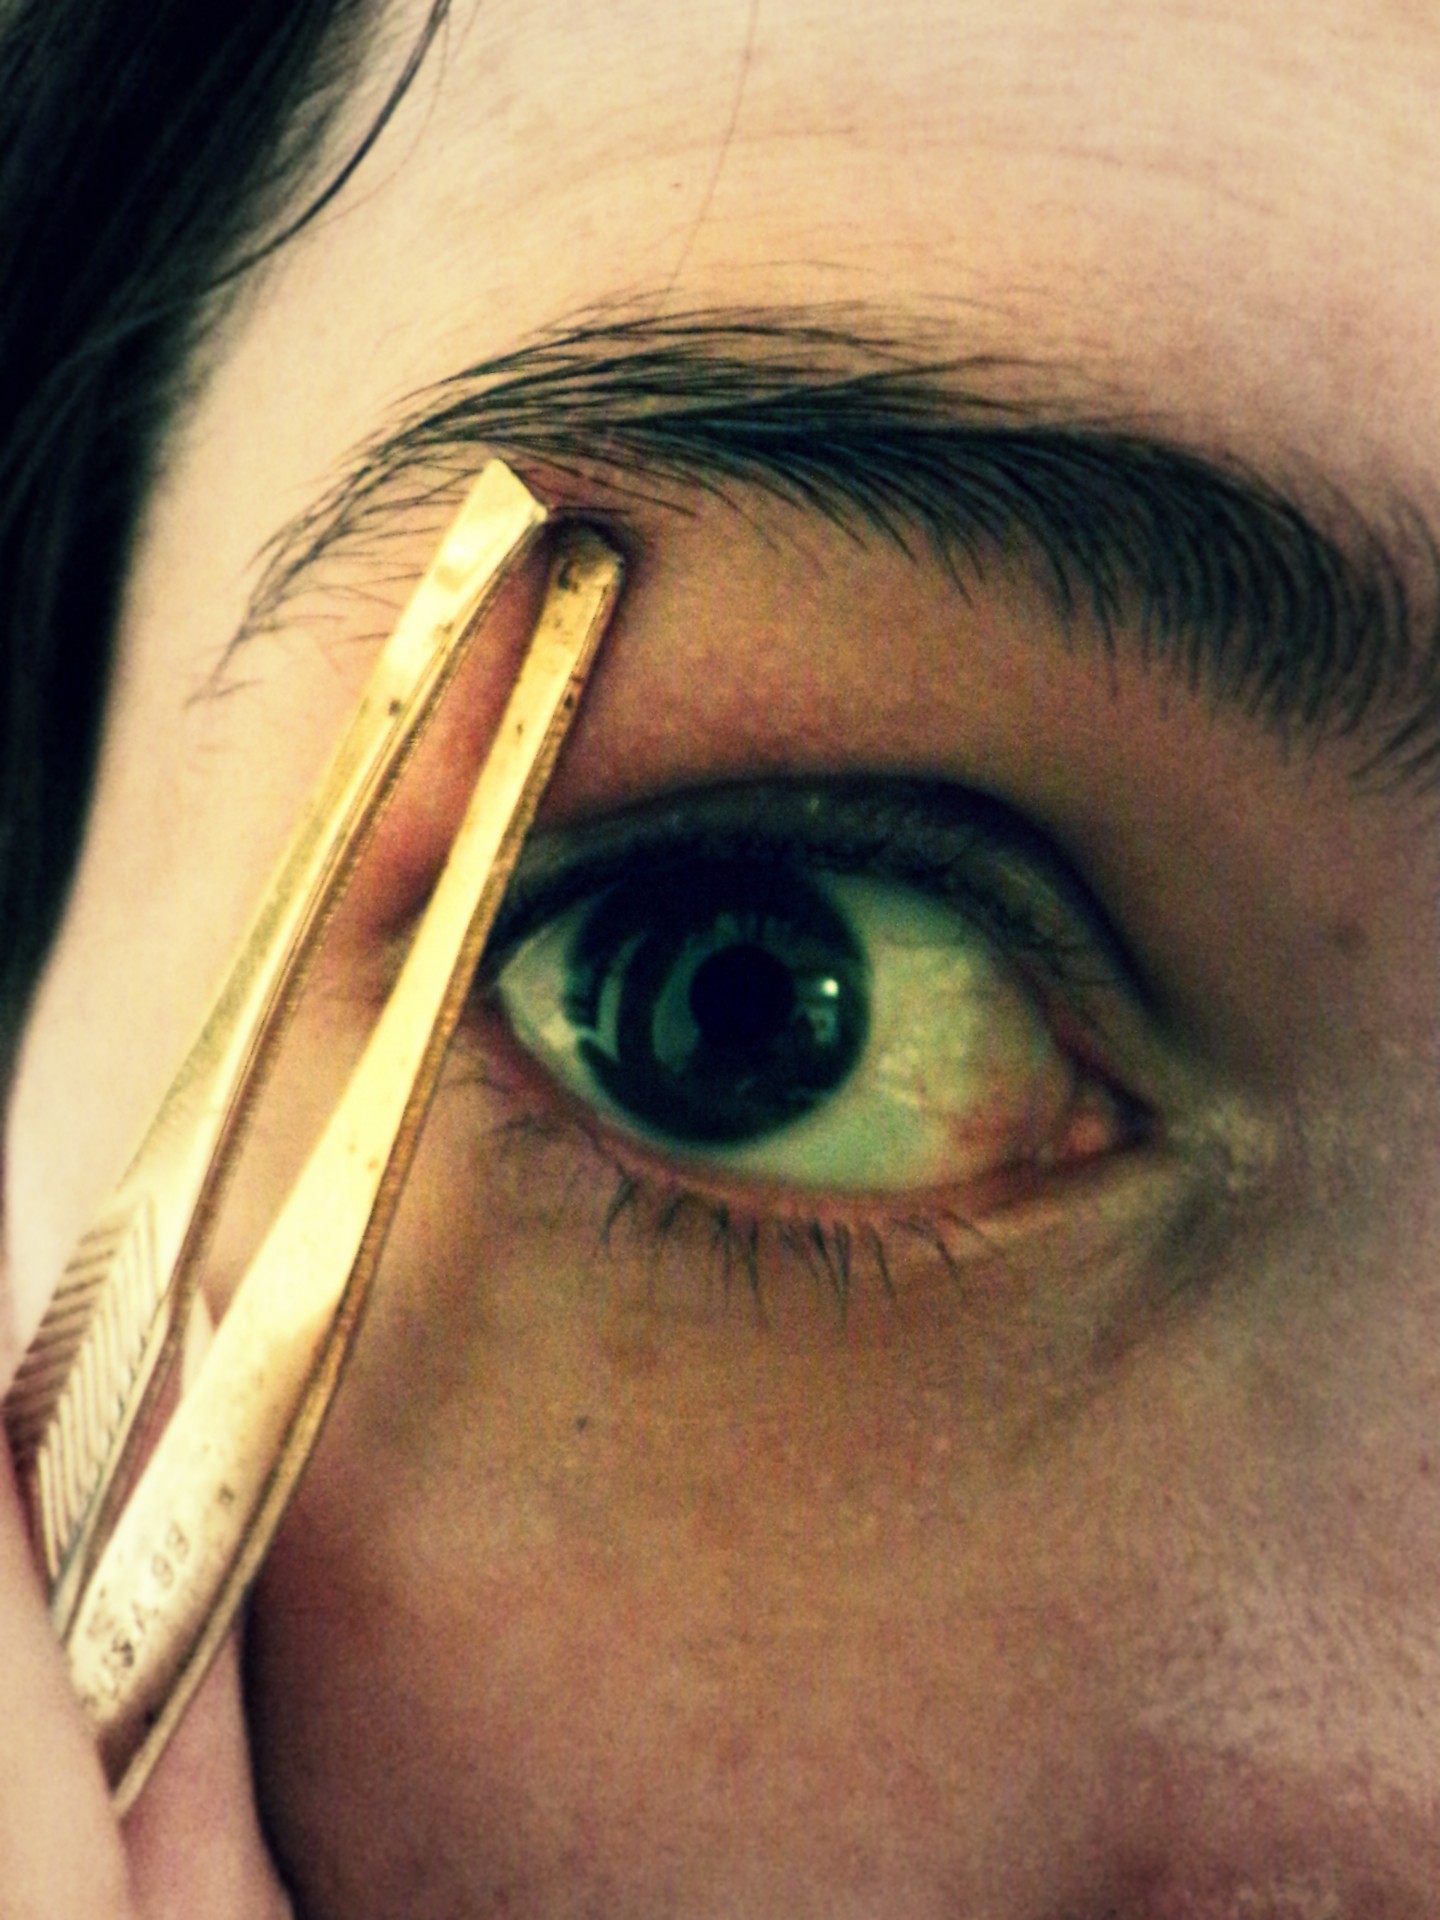 12 Things You Need To Stop Doing To Your Eyebrows